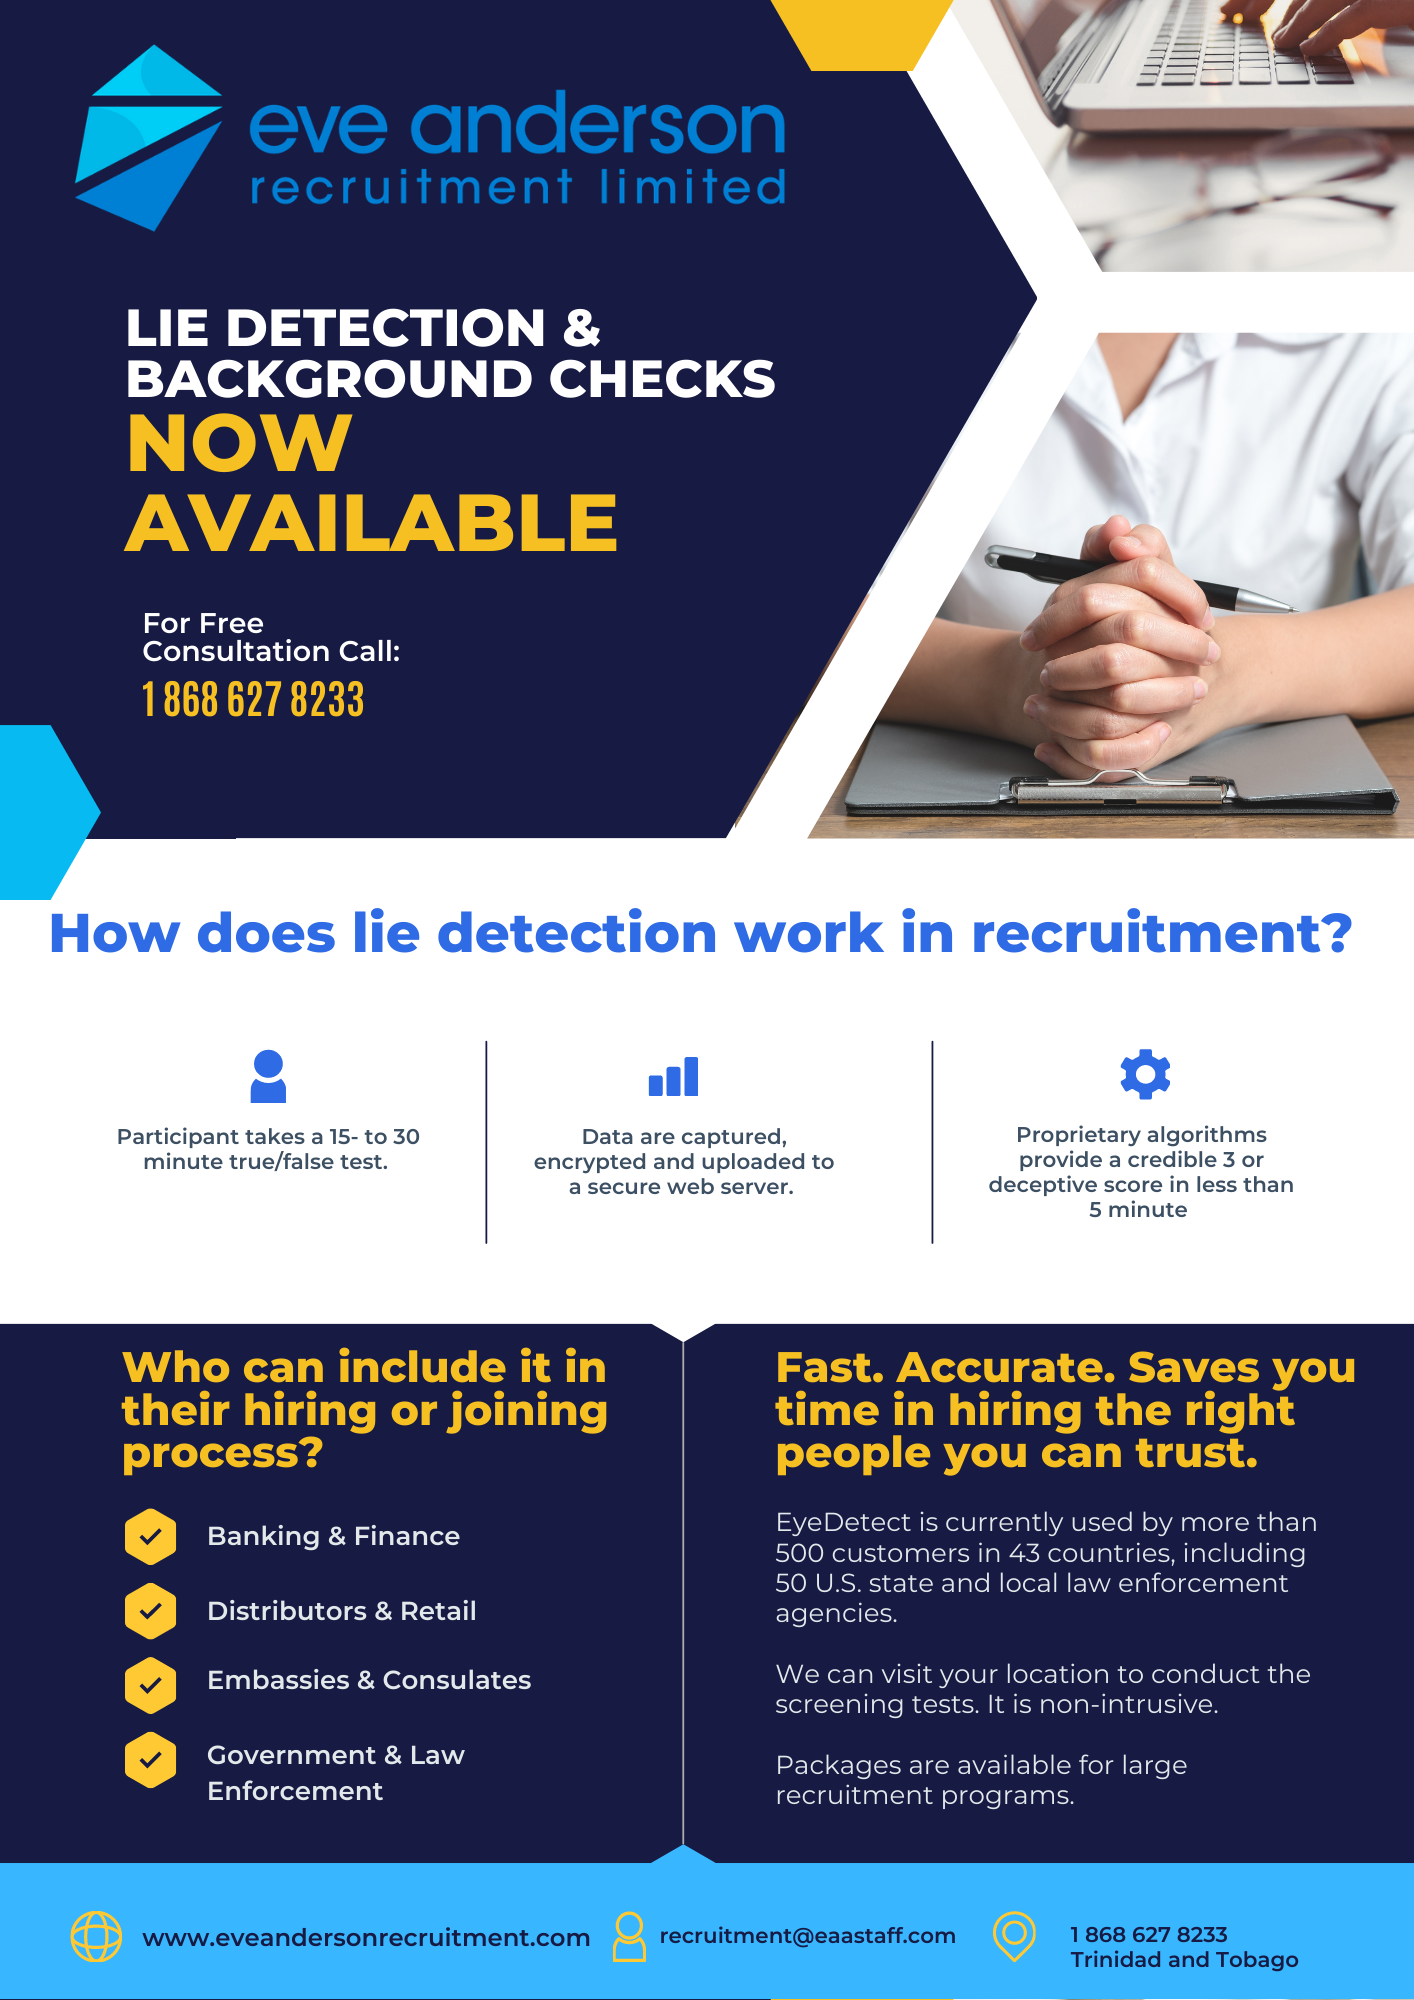 Eve Anderson Recruitment launches Lie Detection non-intrusive screening tests